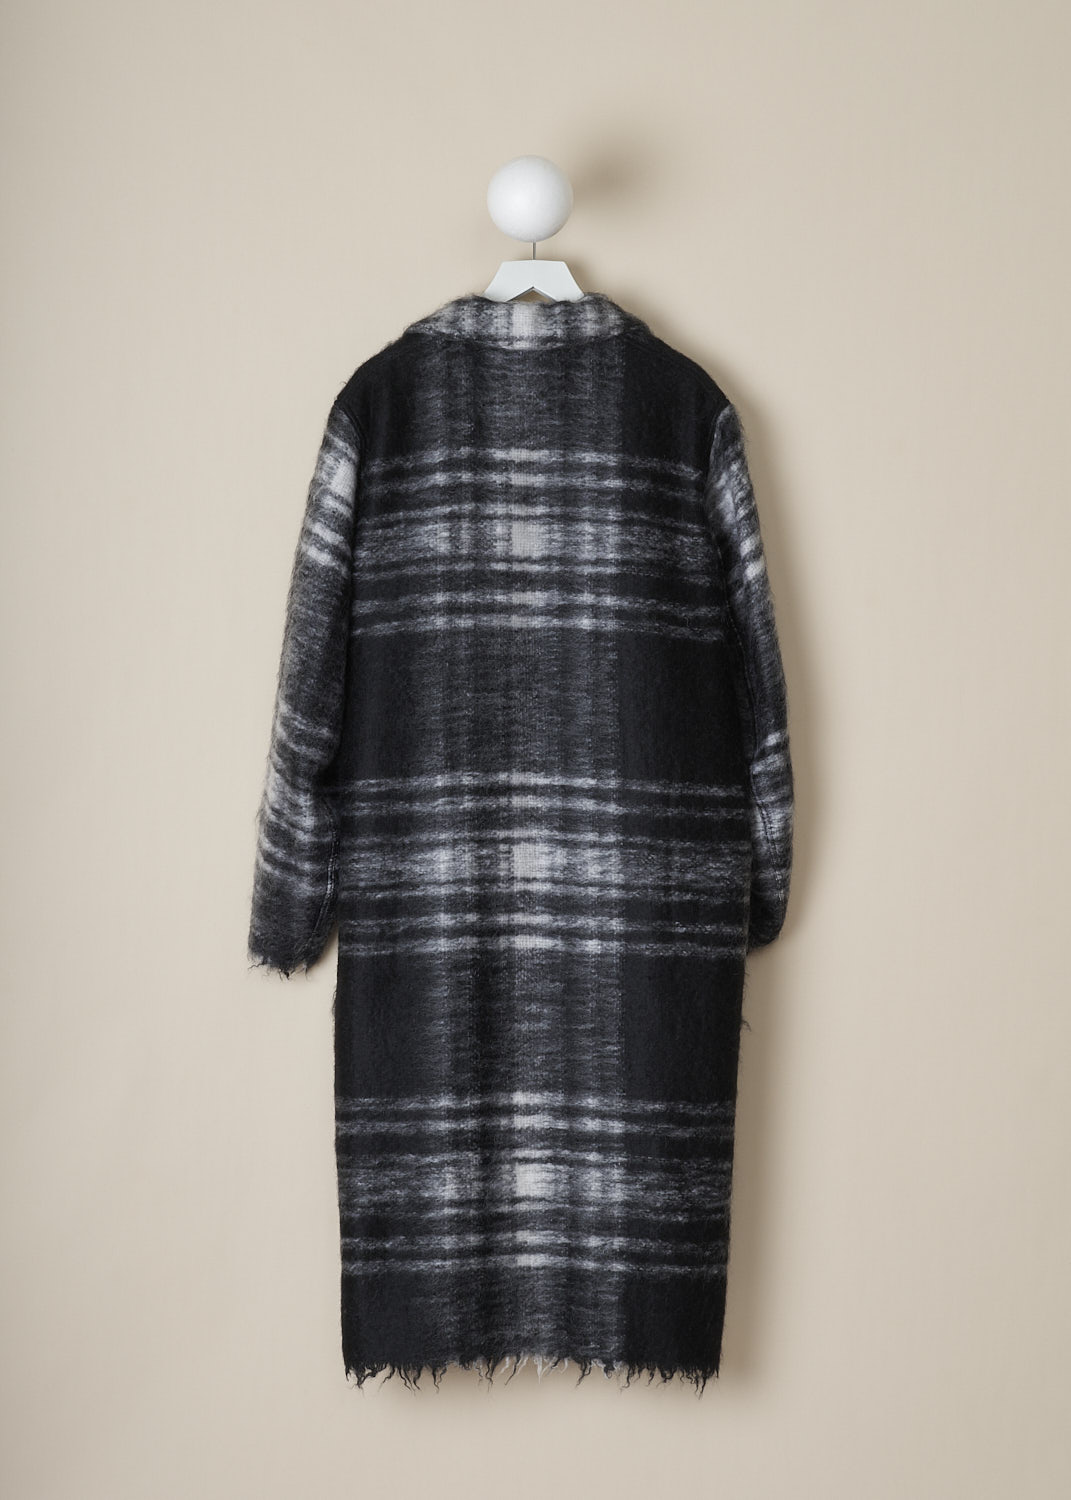 SOFIE Dâ€™HOORE, LONG BLACK AND WHITE TARTAN CAY COAT, CAY_WOMO_BLACK_TARTAN, Black, White, Print, Back, This long black and white tartan Cay coat has a spread collar and a front button closure. The long sleeves have slightly dropped shoulders and a raw edged cuff. In the front, the coat has on-seam slanted pockets. The coat has a straight raw edged hemline. The coat is fully lined and has a single inner pocket. 
